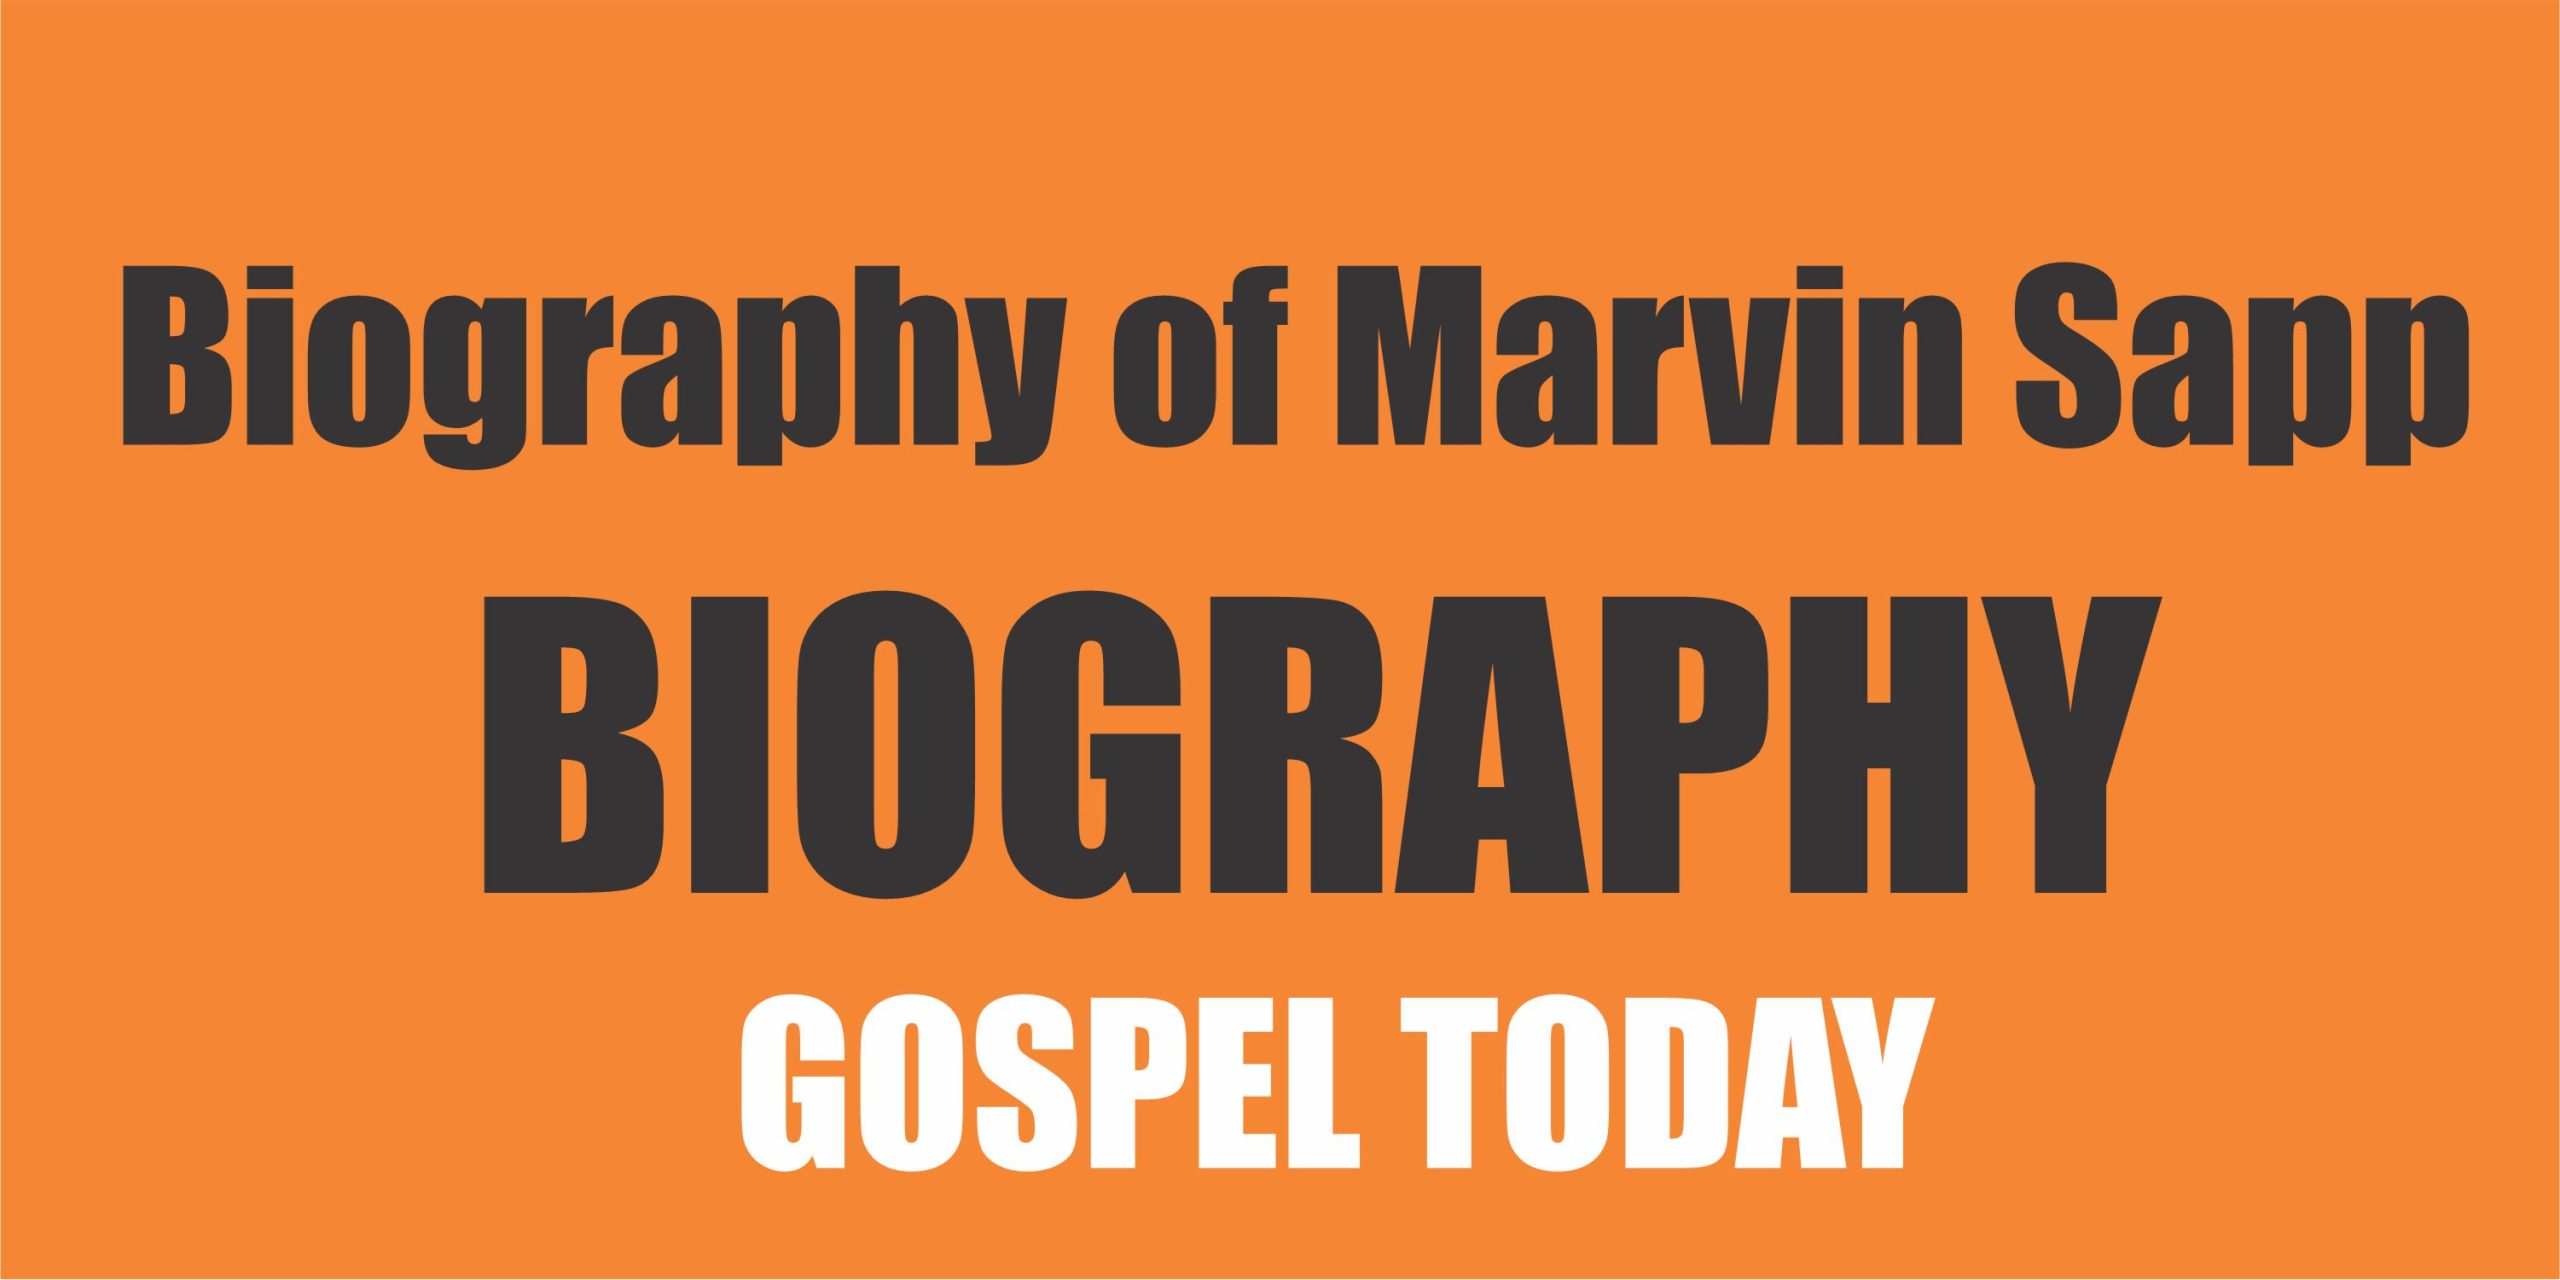 Biography of Marvin Sapp